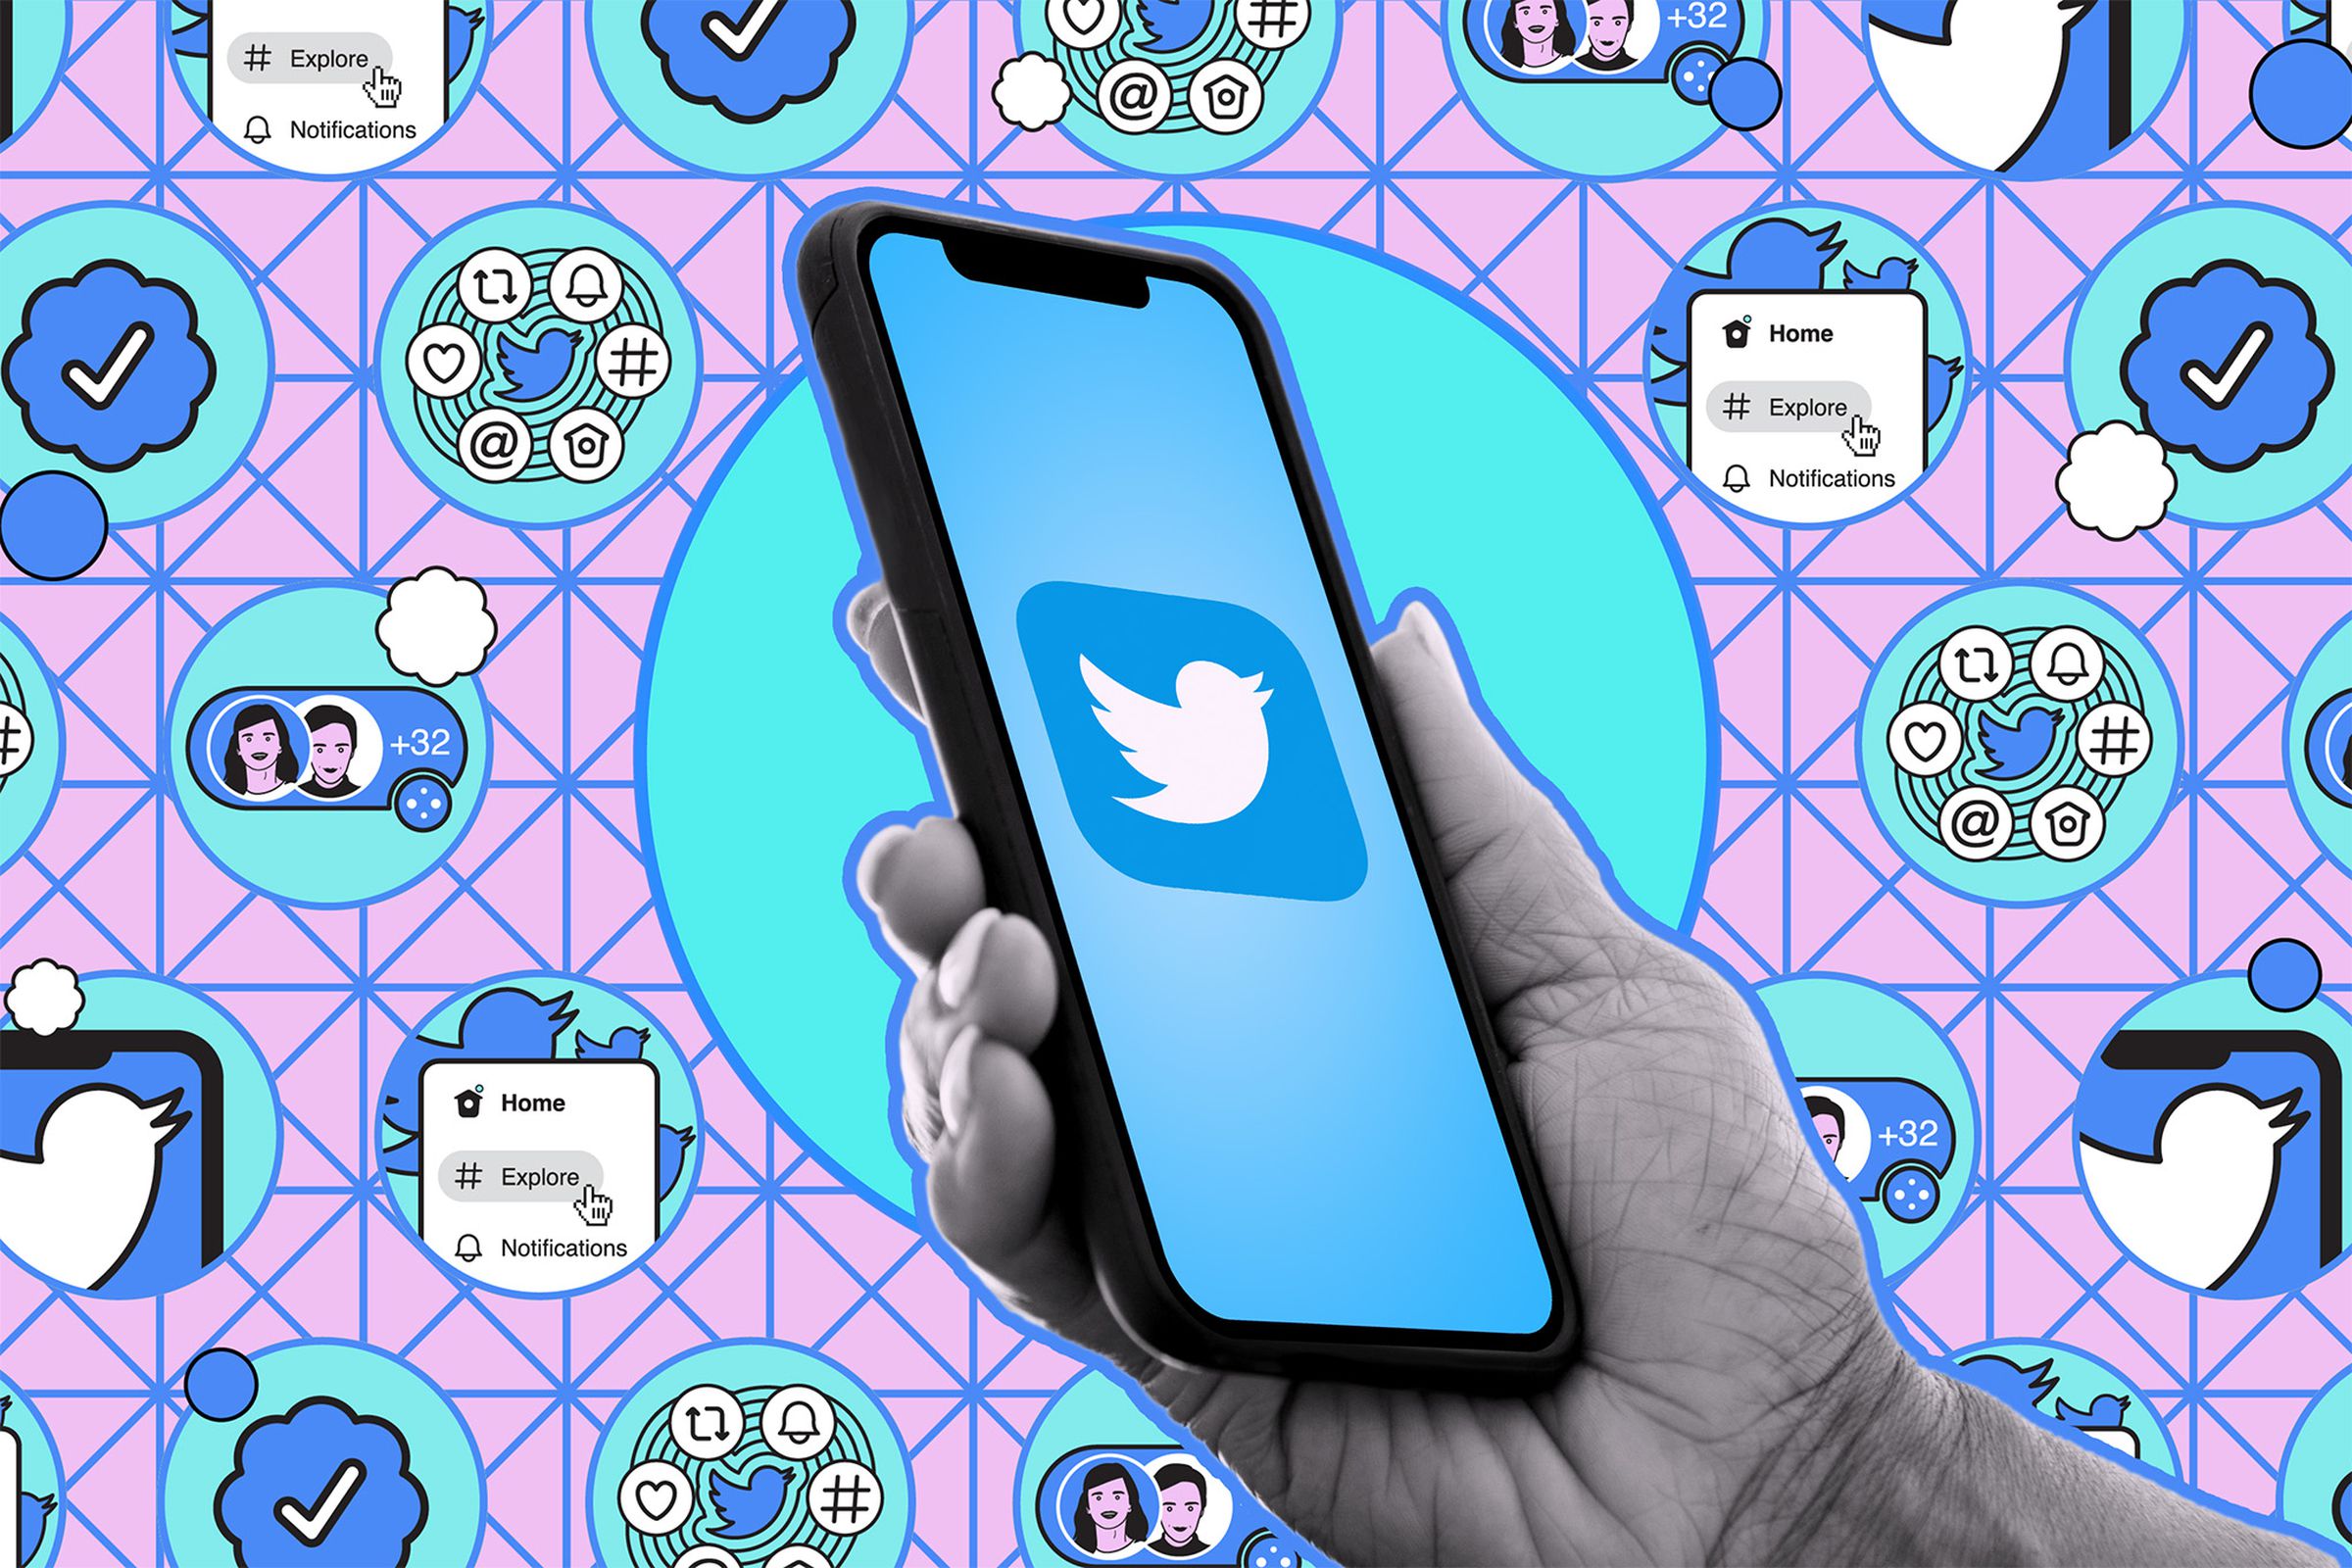 An image showing someone holding a phone with the Twitter logo on it